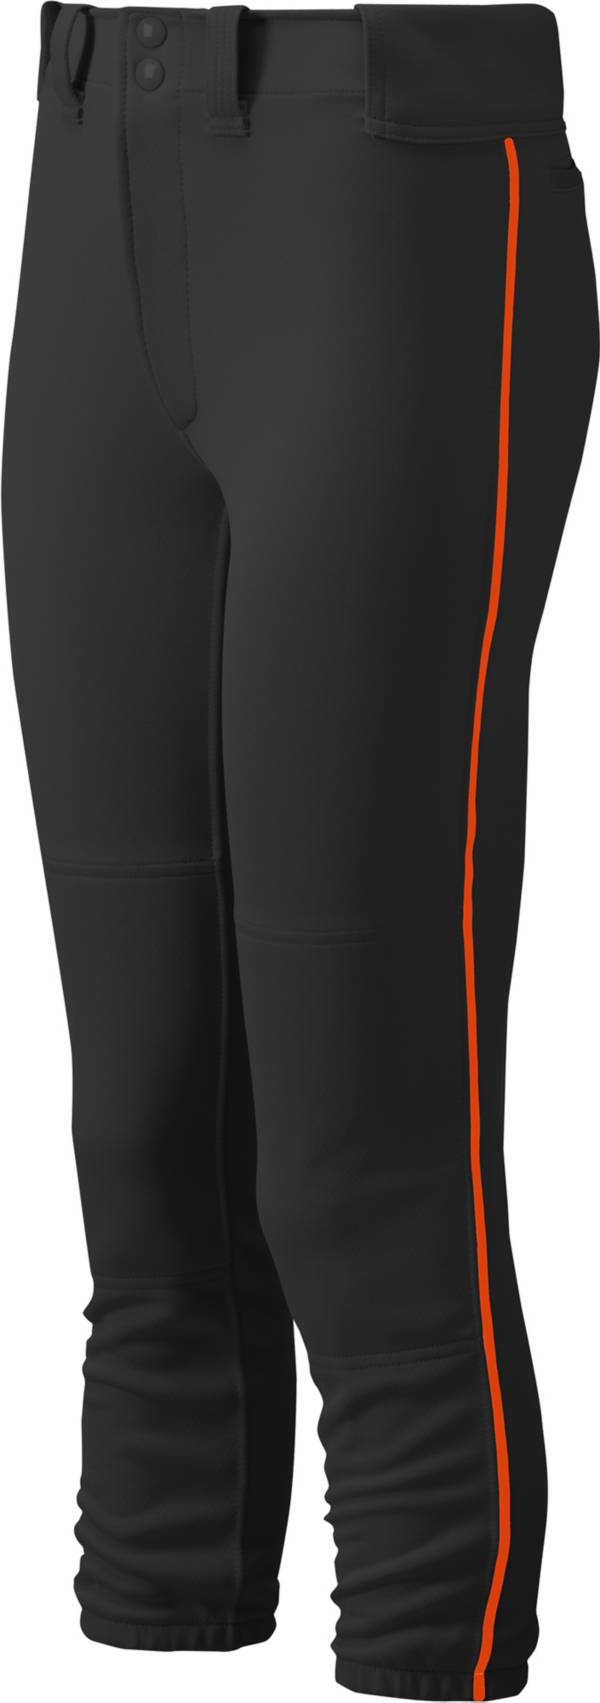 Mizuno Women's Belted Piped Softball Pants product image